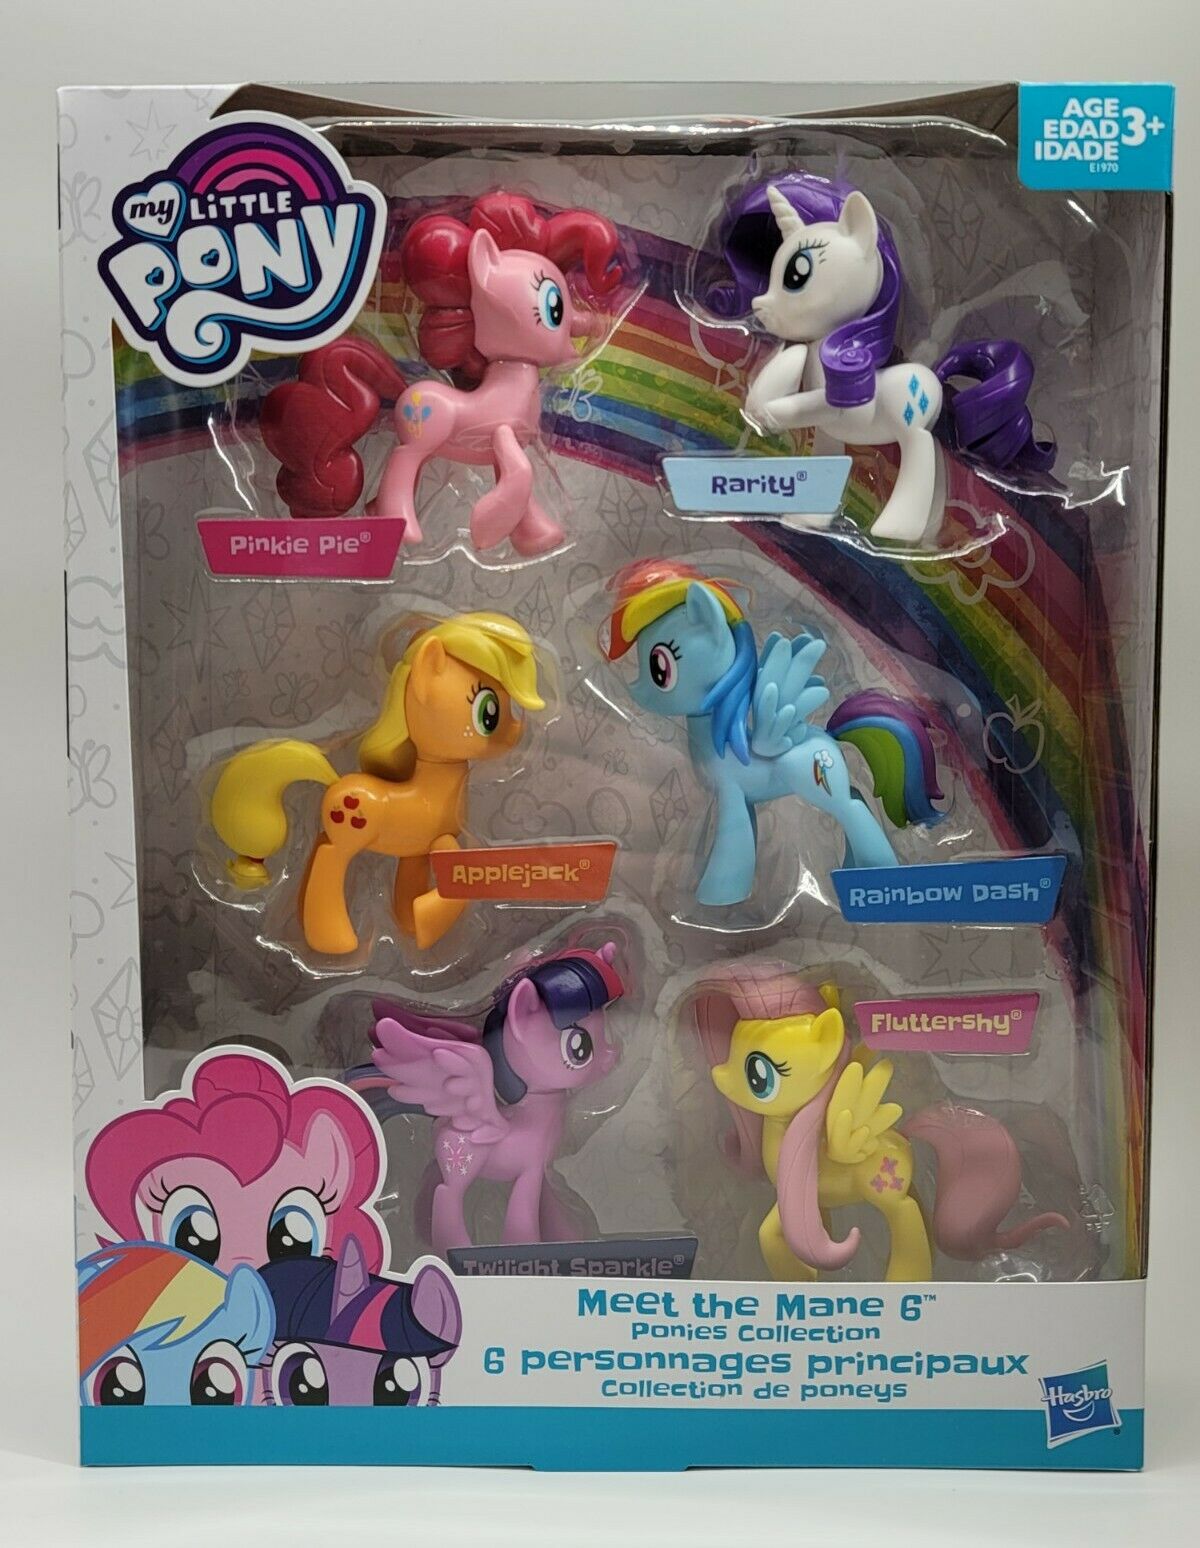 Exclusive My Little Pony Toys Meet The Mane 6 Ponies Collection Sealed